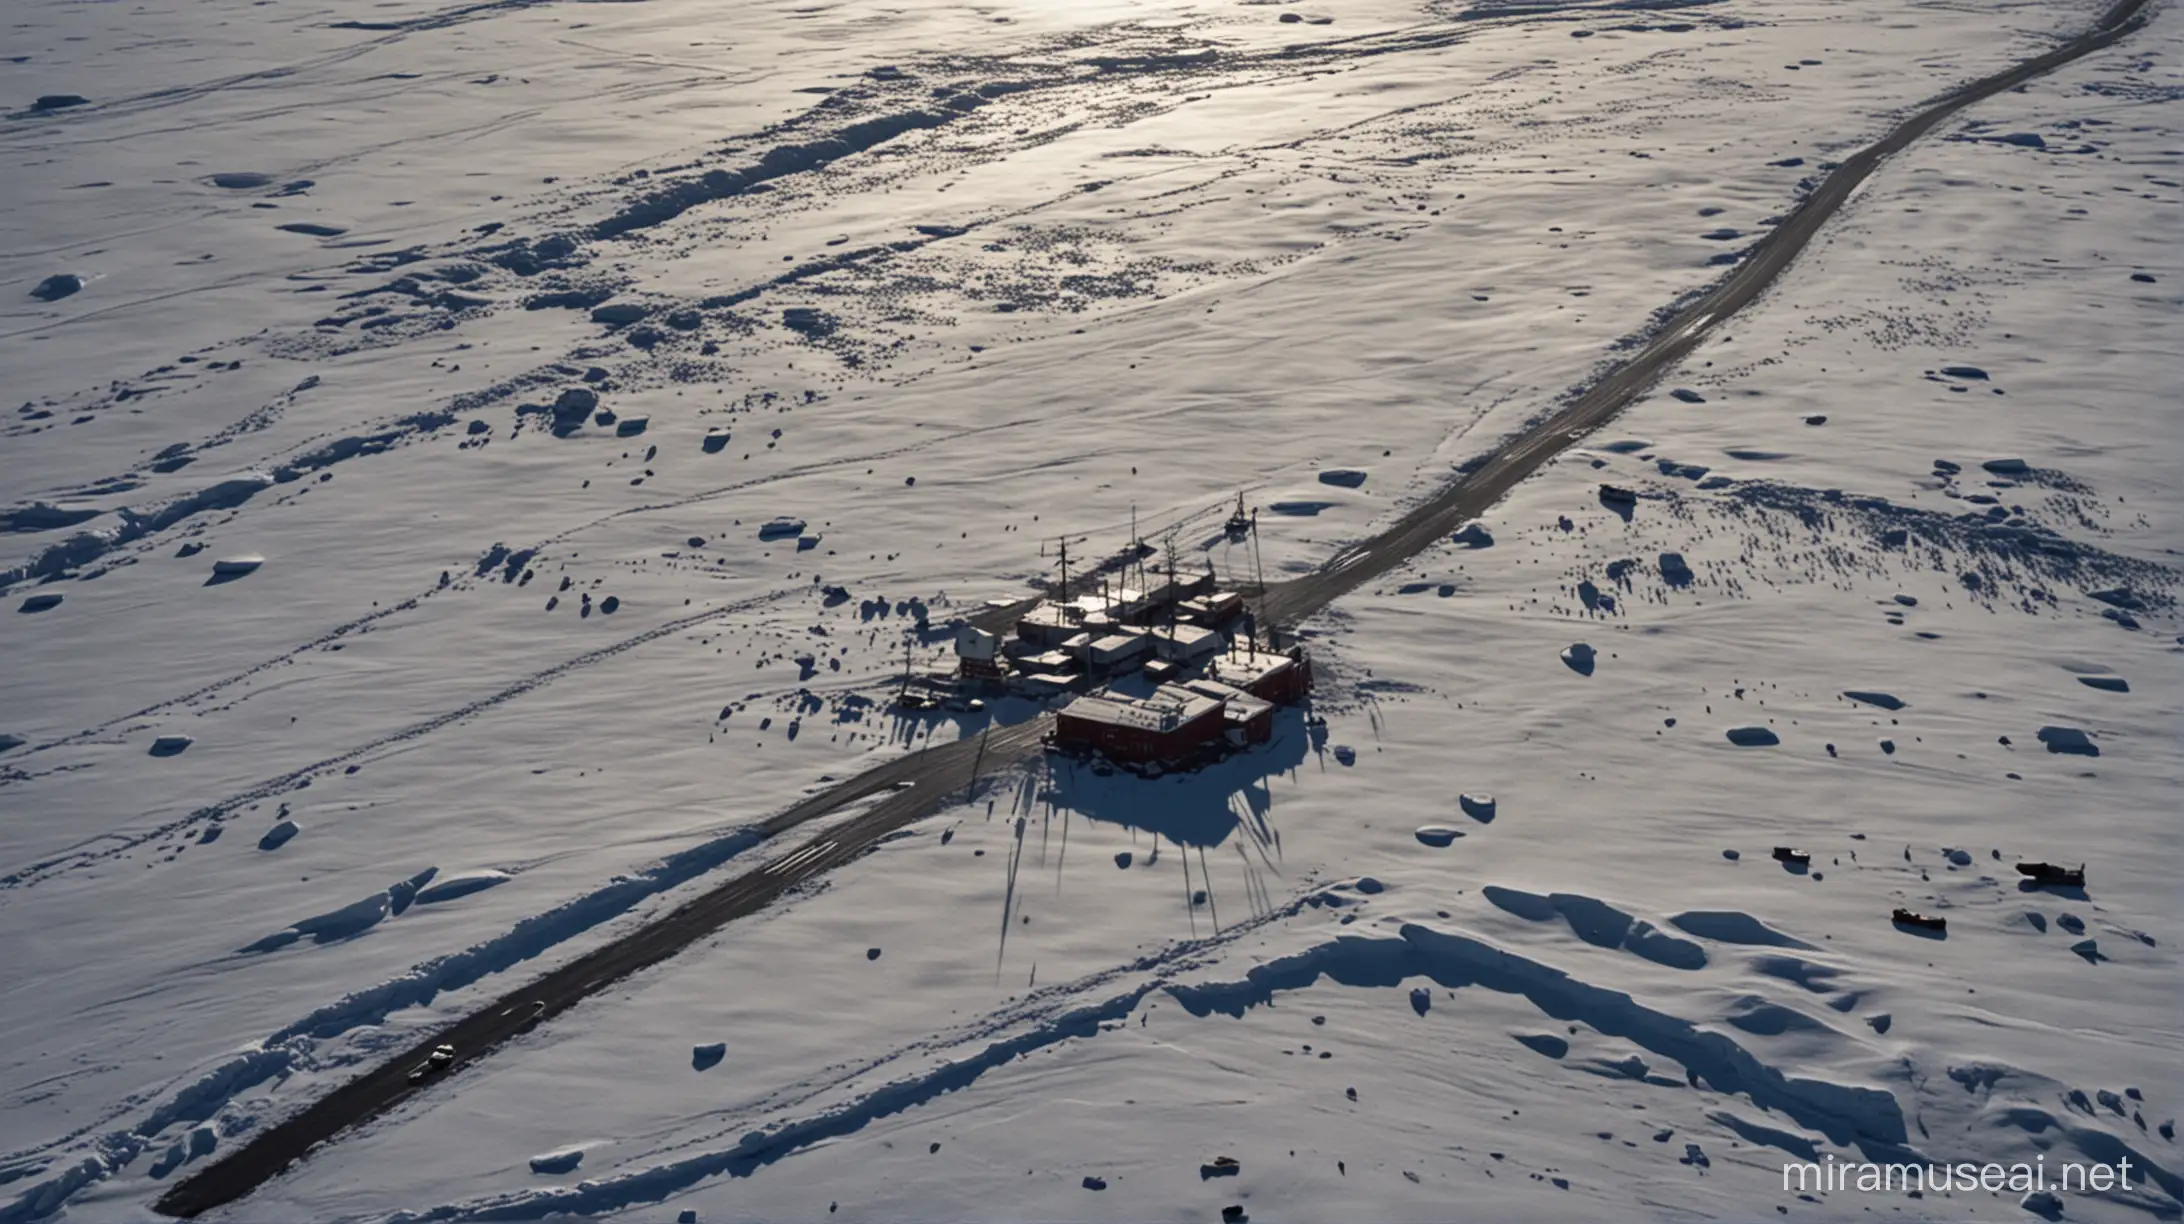 Cinematic Still The Thing Film Scene at McMurdo Station Antarctica Aerial View